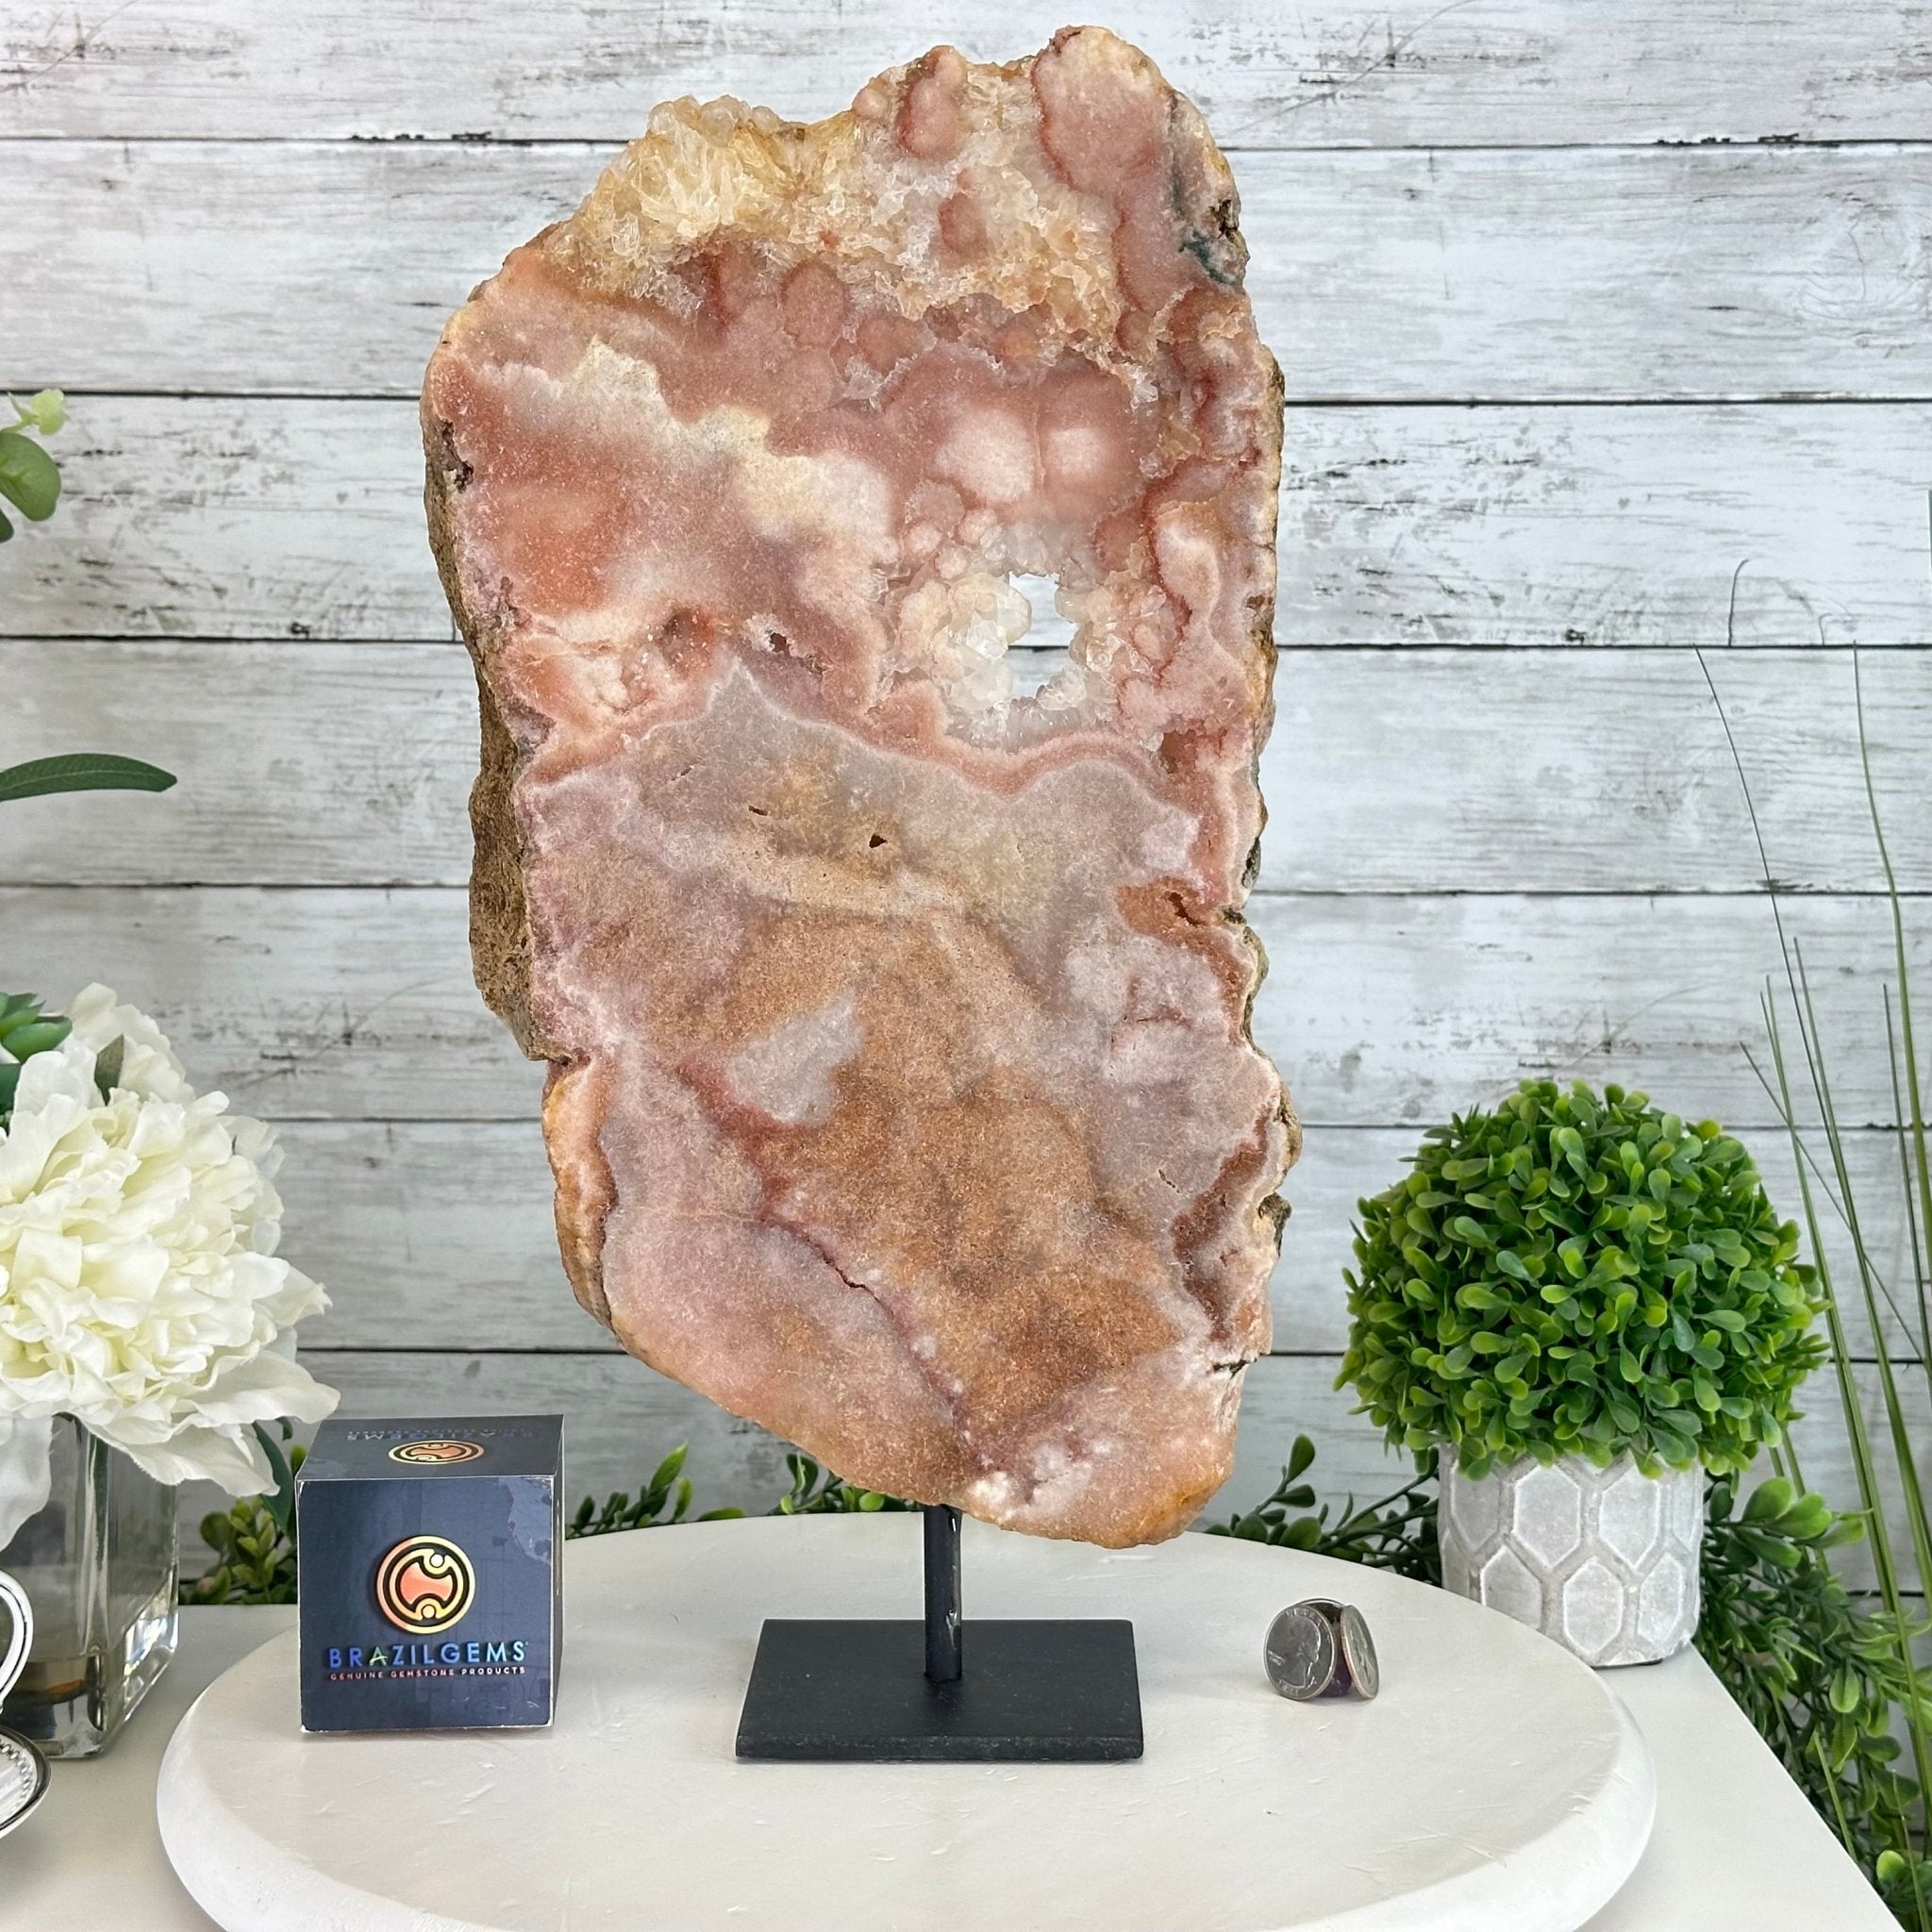 Polished Pink Amethyst Slice on a Stand, 8.3 lbs & 16.7" Tall #5743-0031 - Brazil GemsBrazil GemsPolished Pink Amethyst Slice on a Stand, 8.3 lbs & 16.7" Tall #5743-0031Slices on Fixed Bases5743-0031